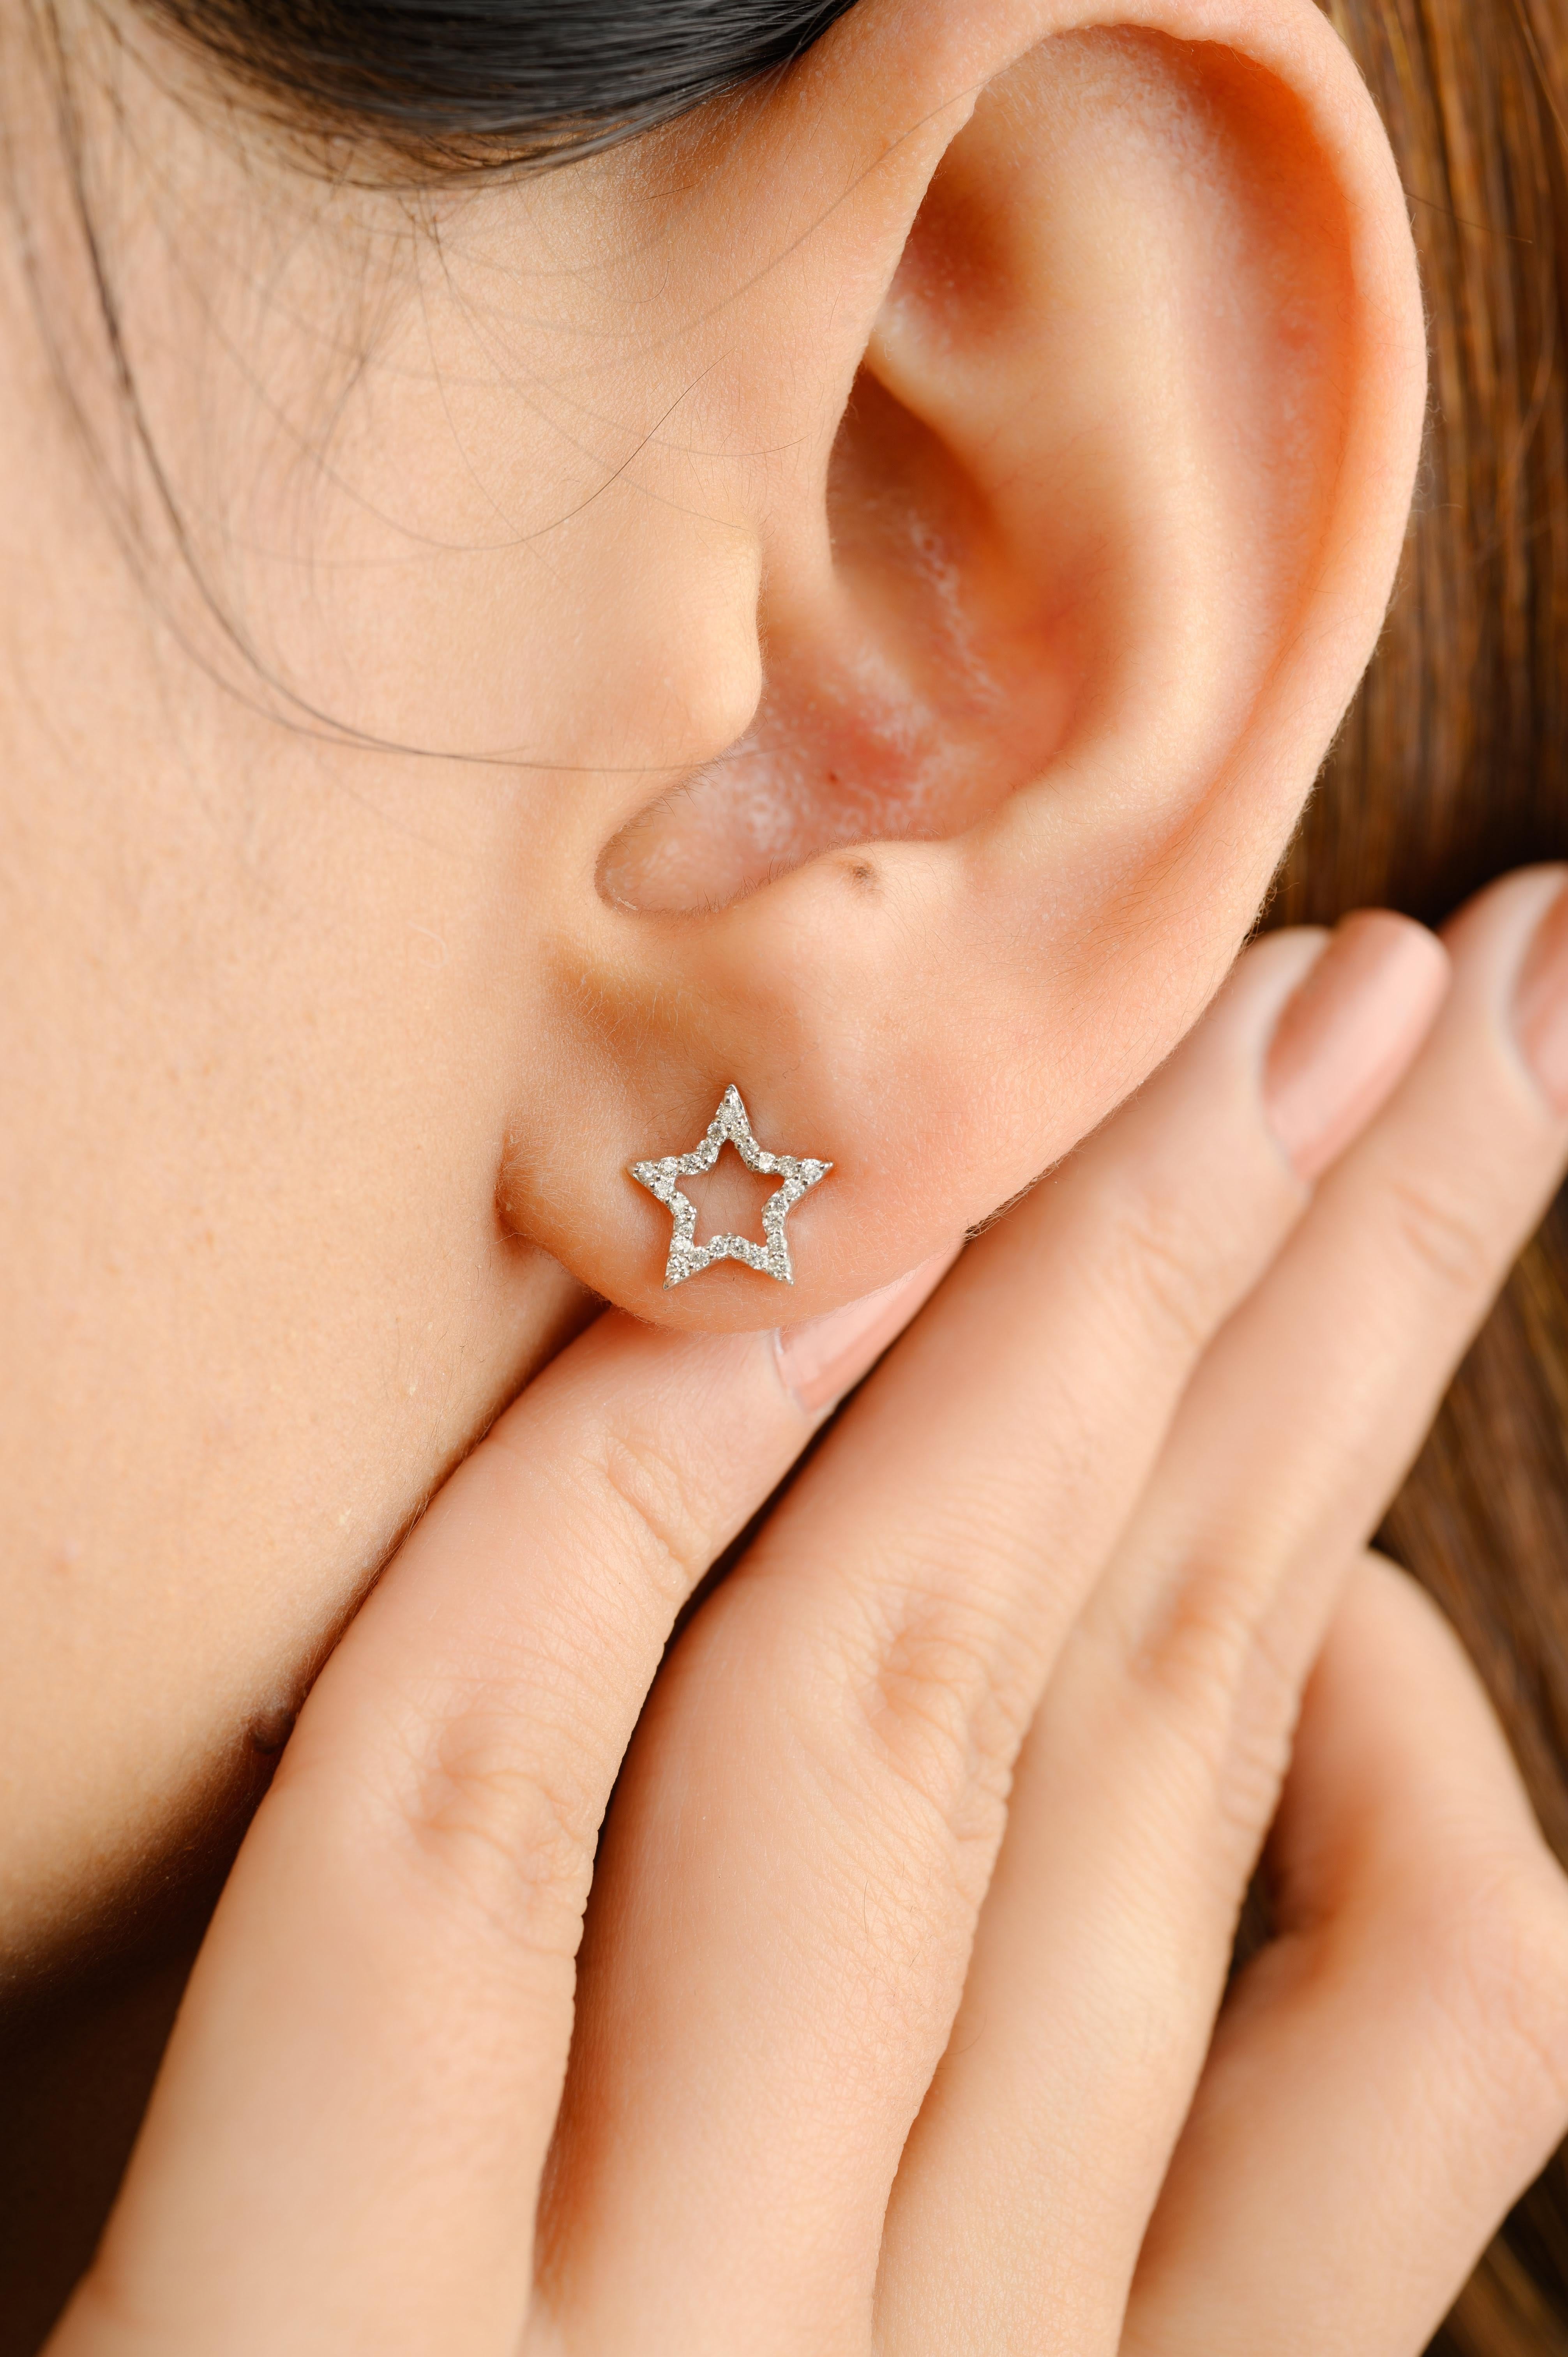 Natural Diamond Star Stud Earrings in 18K Gold to make a statement with your look. You shall need stud earrings to make a statement with your look. These earrings create a sparkling, luxurious look featuring round cut diamond.
April birthstone